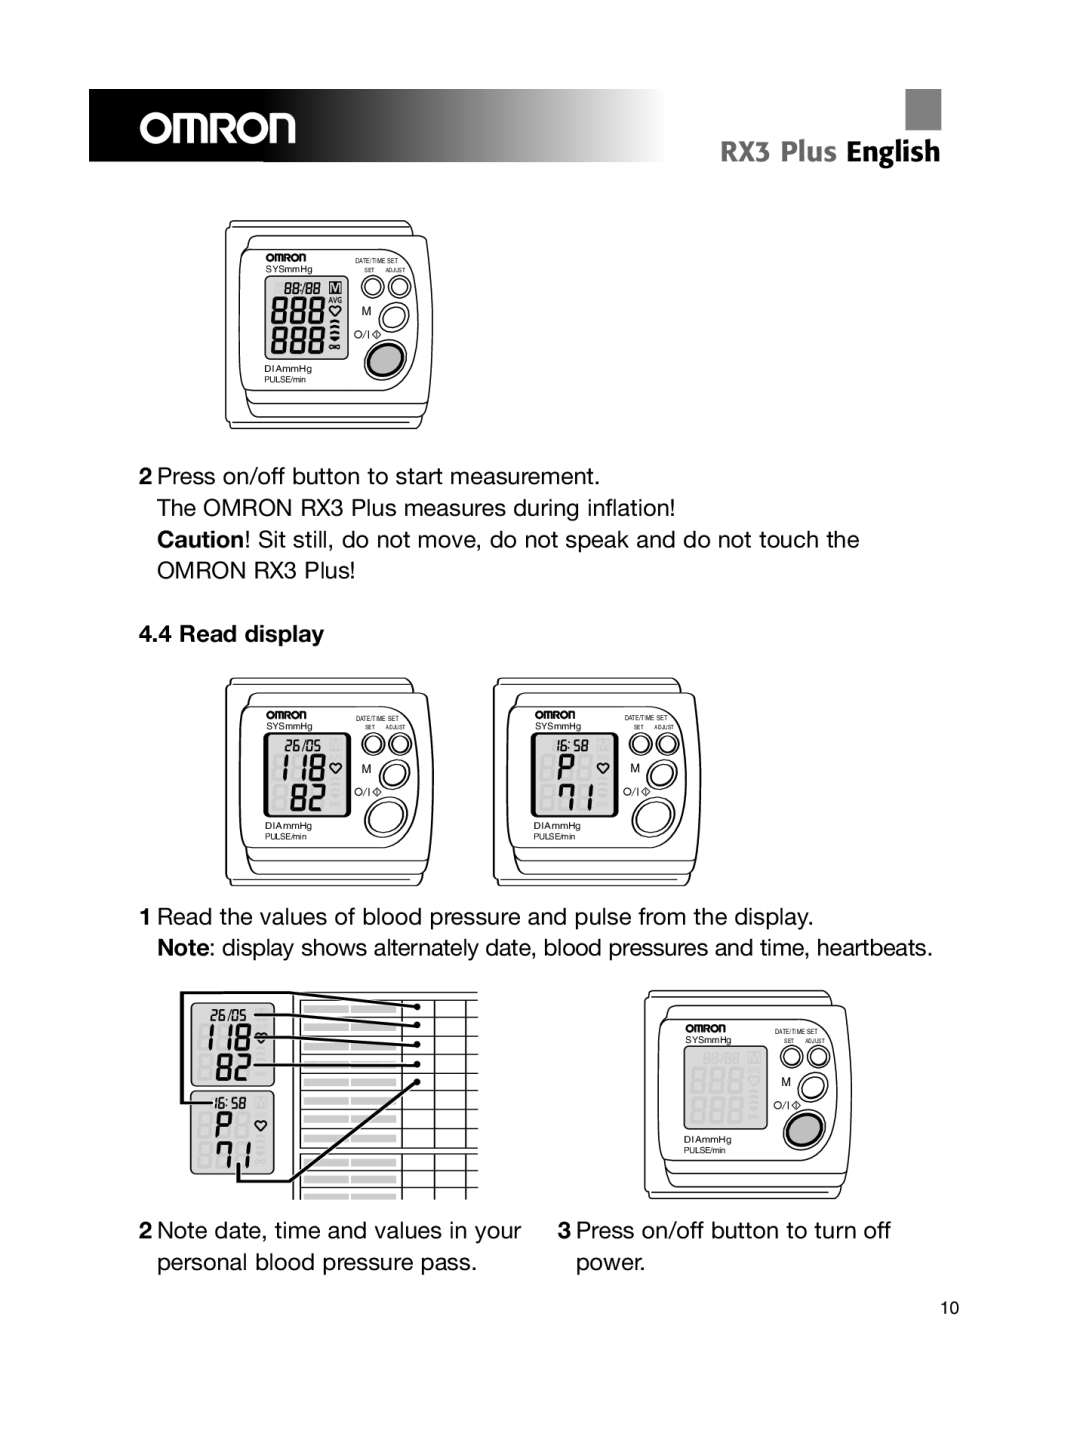 Omron Healthcare RX3 manual Read the values of blood pressure and pulse from the display 